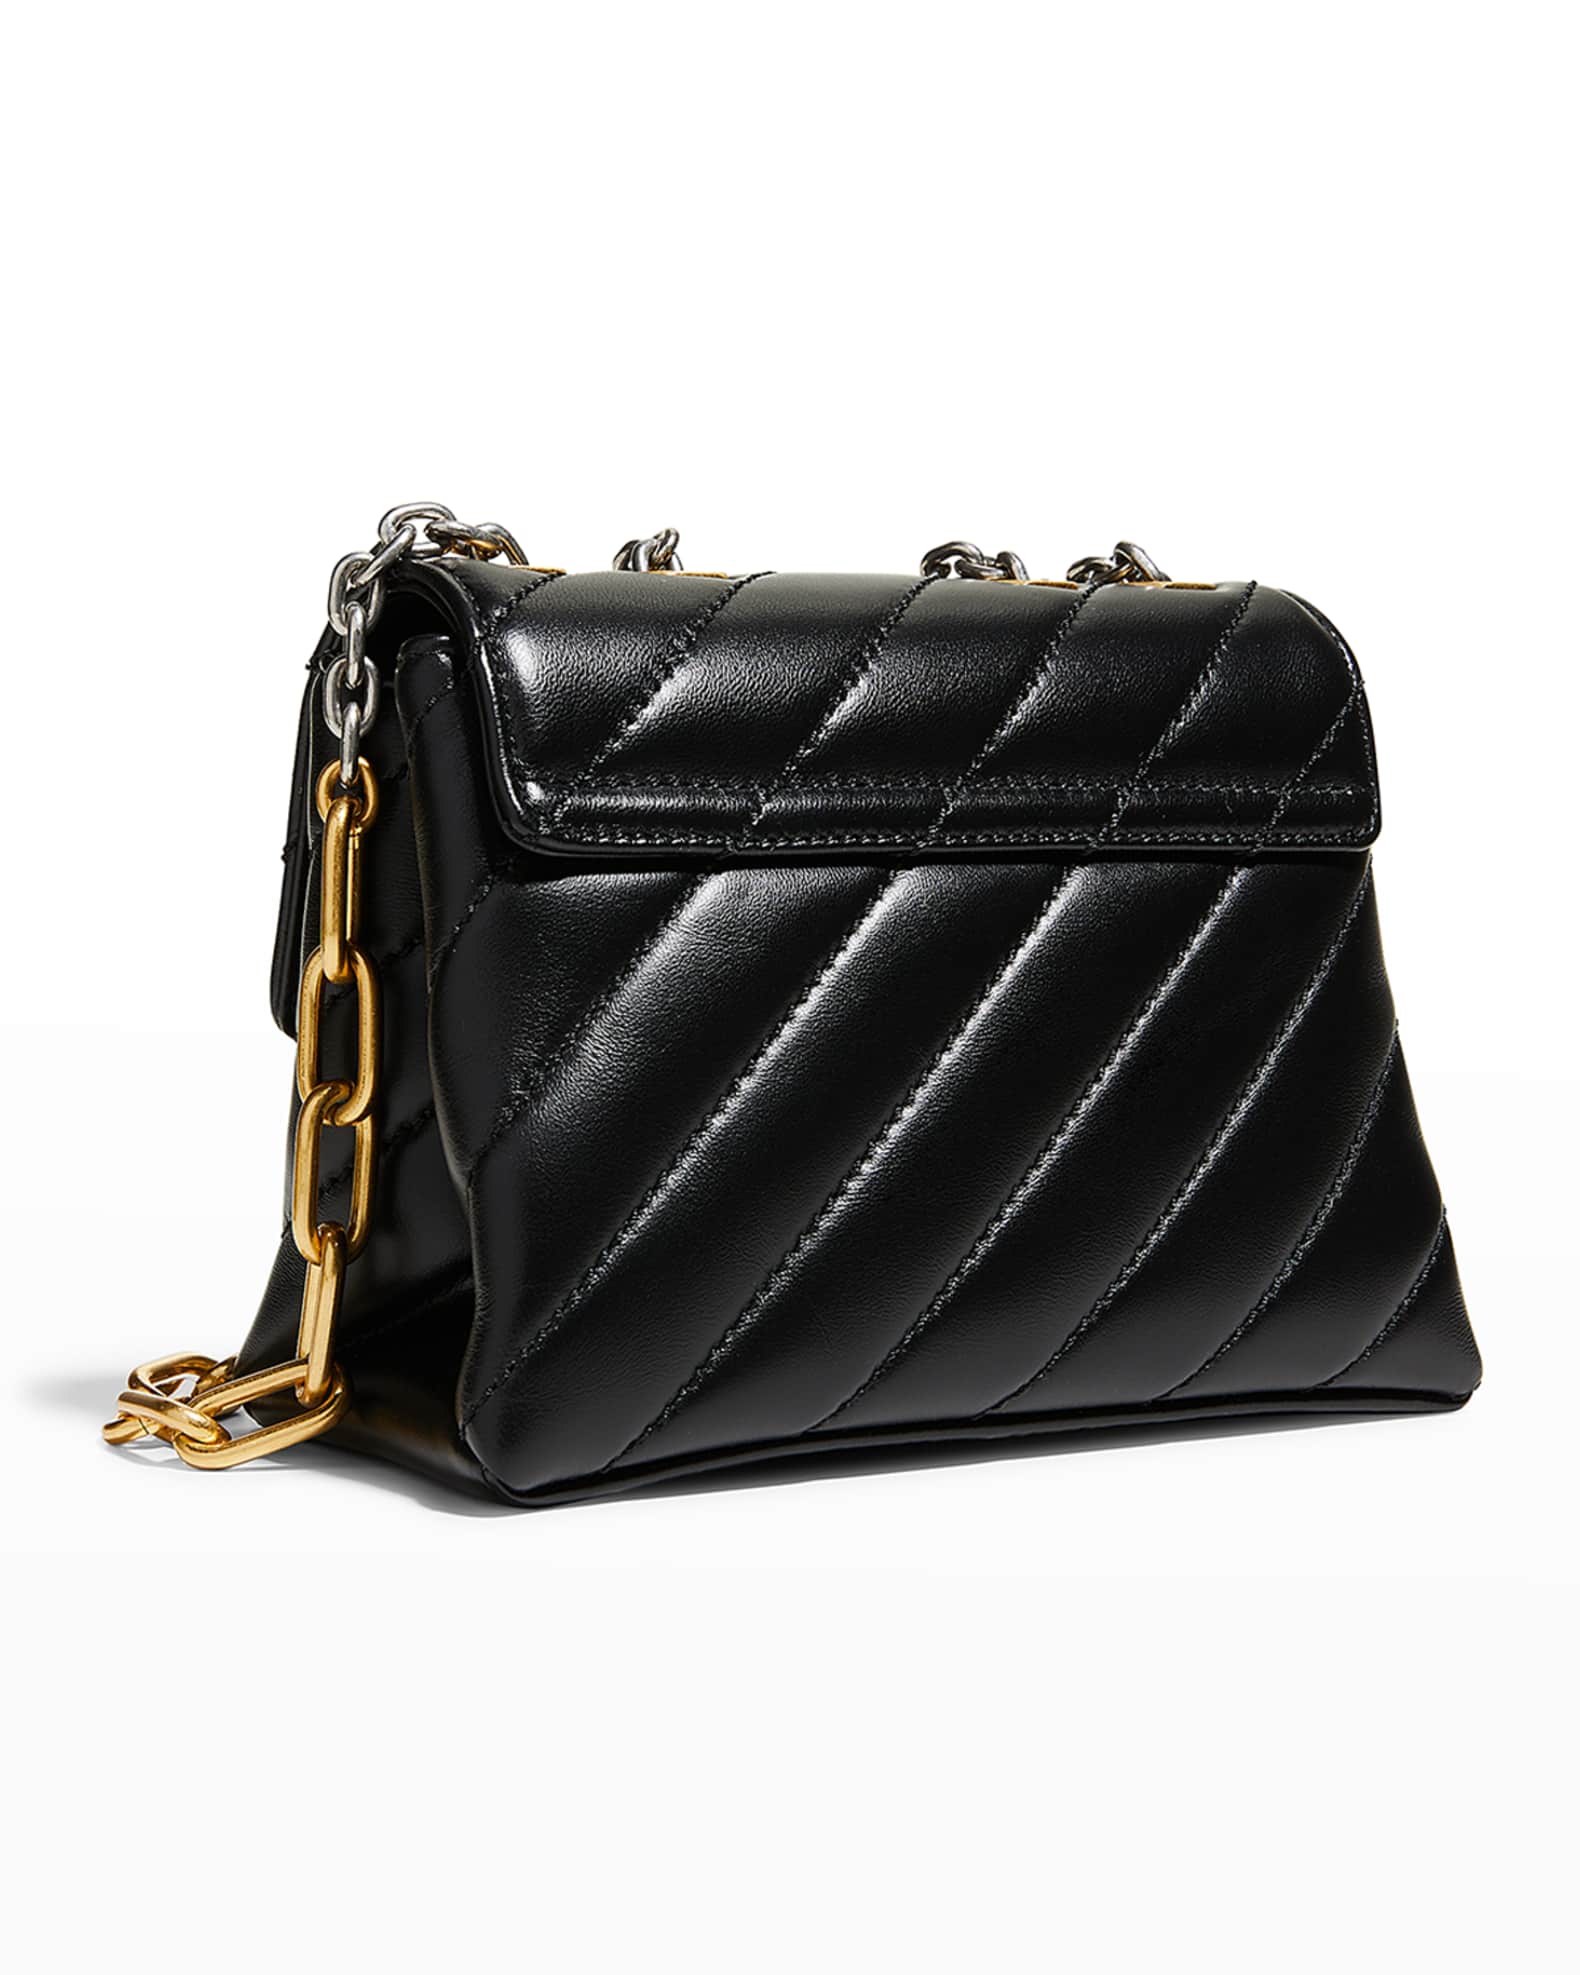 Off-White Jackhammer 19 Arrow Quilted Chain Shoulder Bag | Neiman Marcus